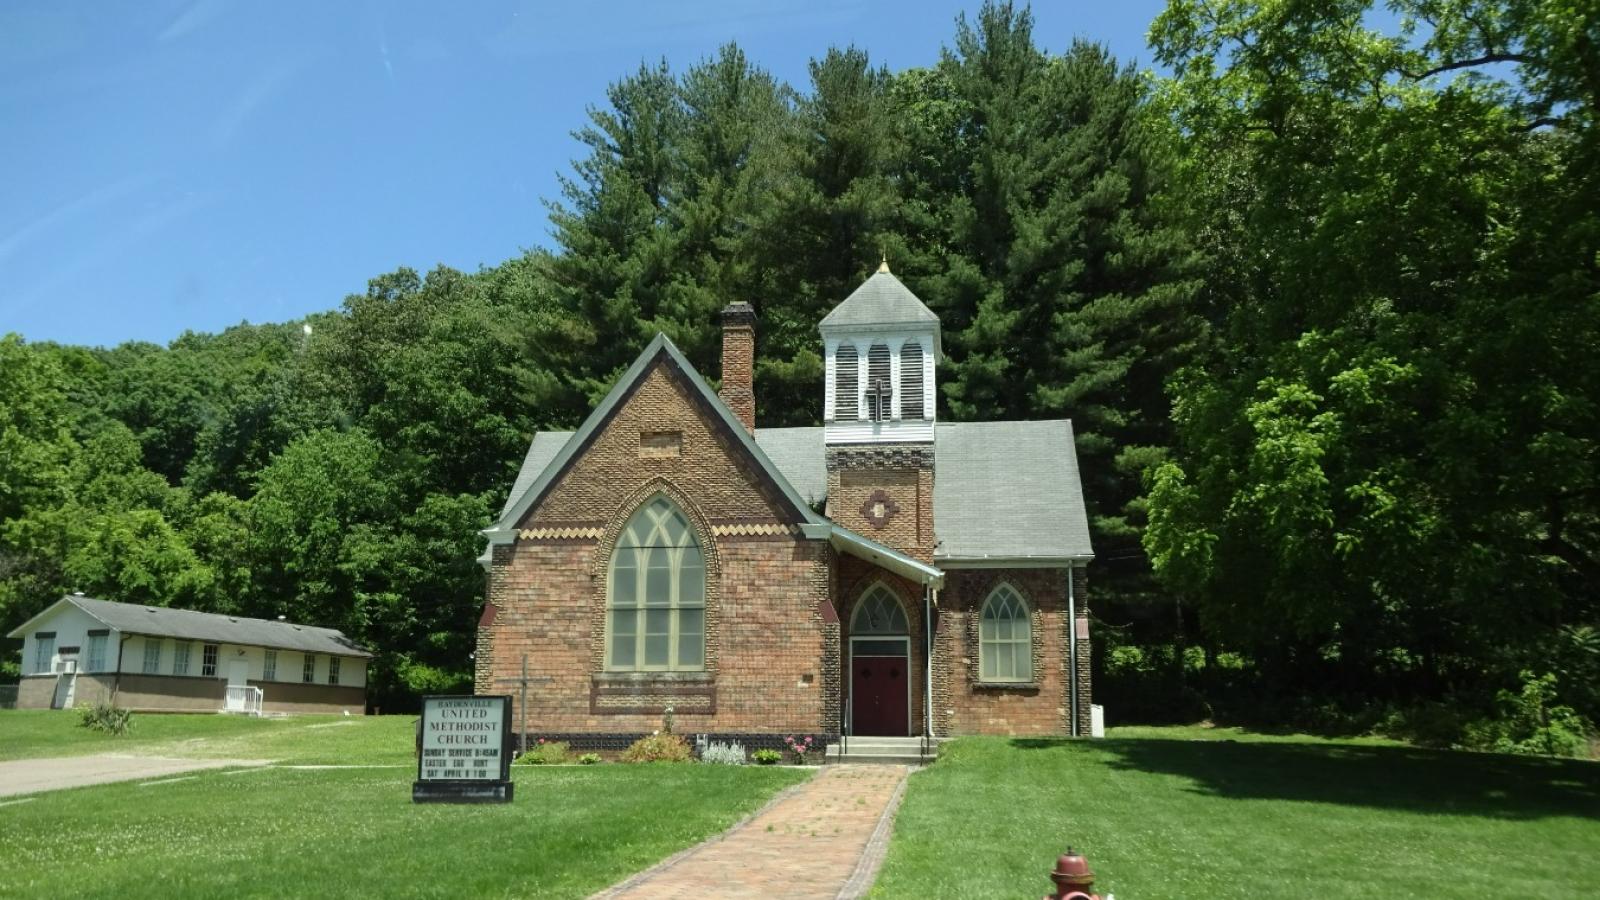 A small, brick Methodist church. The church has a large front window, a pair of red doors to the right of the large window, a chimney, and a white steeple with a cross on the front of it. There is a brick path leading up to the church building; on either side of the path is a well-manicured and very green lawn. On the left of the brick path is a white, square church sign which reads “Haydenville United Methodist Church, Sunday service 8:45AM, Easter egg hunt, Sat April 9. 1:00”